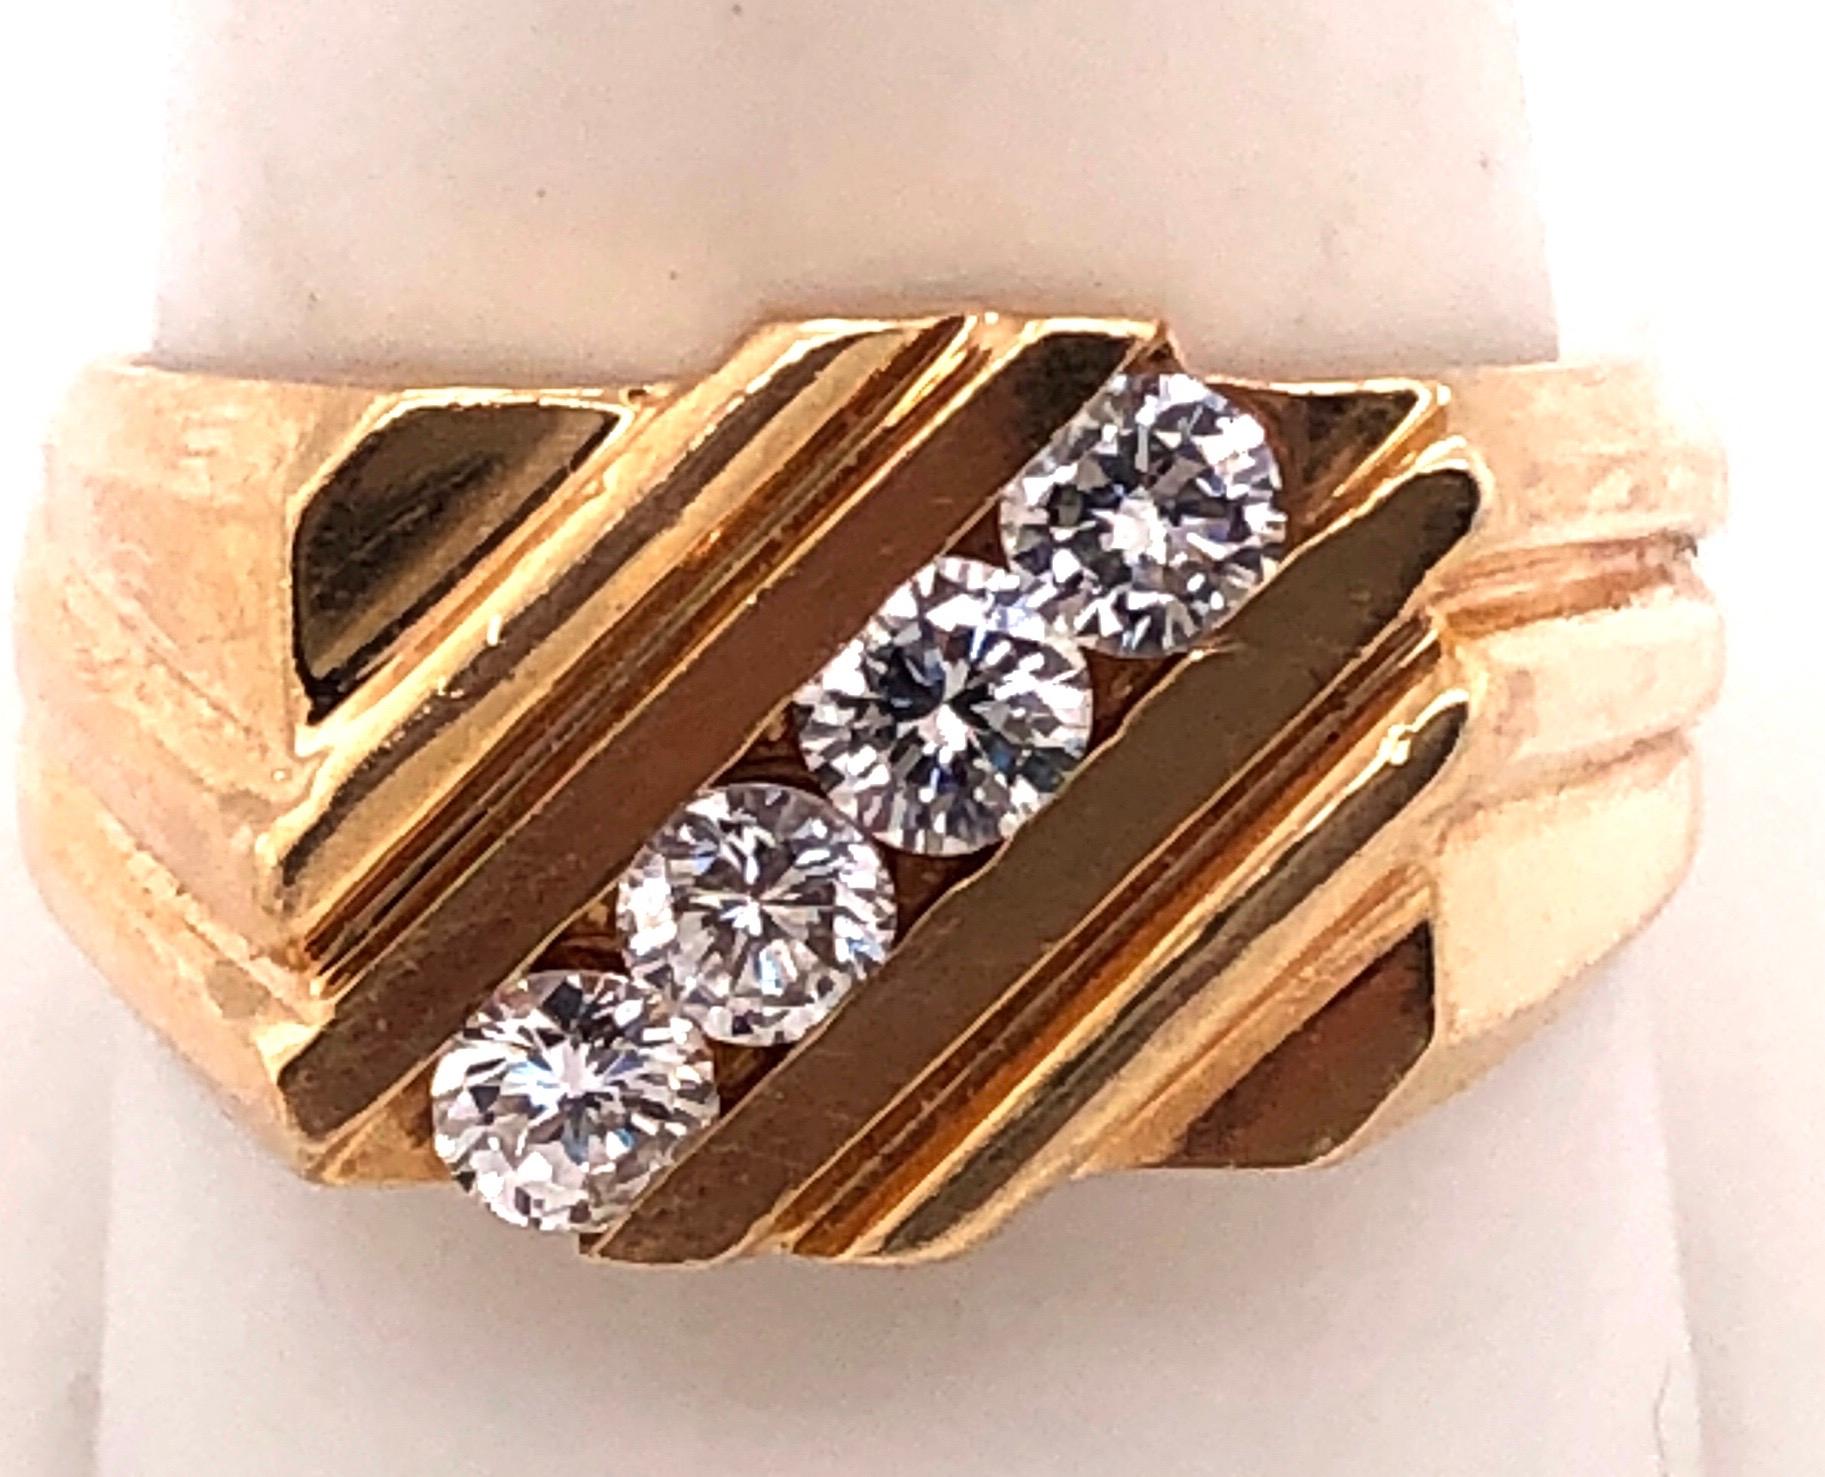 14Kt Yellow Gold Free Form Ring with Four Diamonds 0.60 Total Diamond Weight
Size 10.5 with 9.1 grams total weight.

